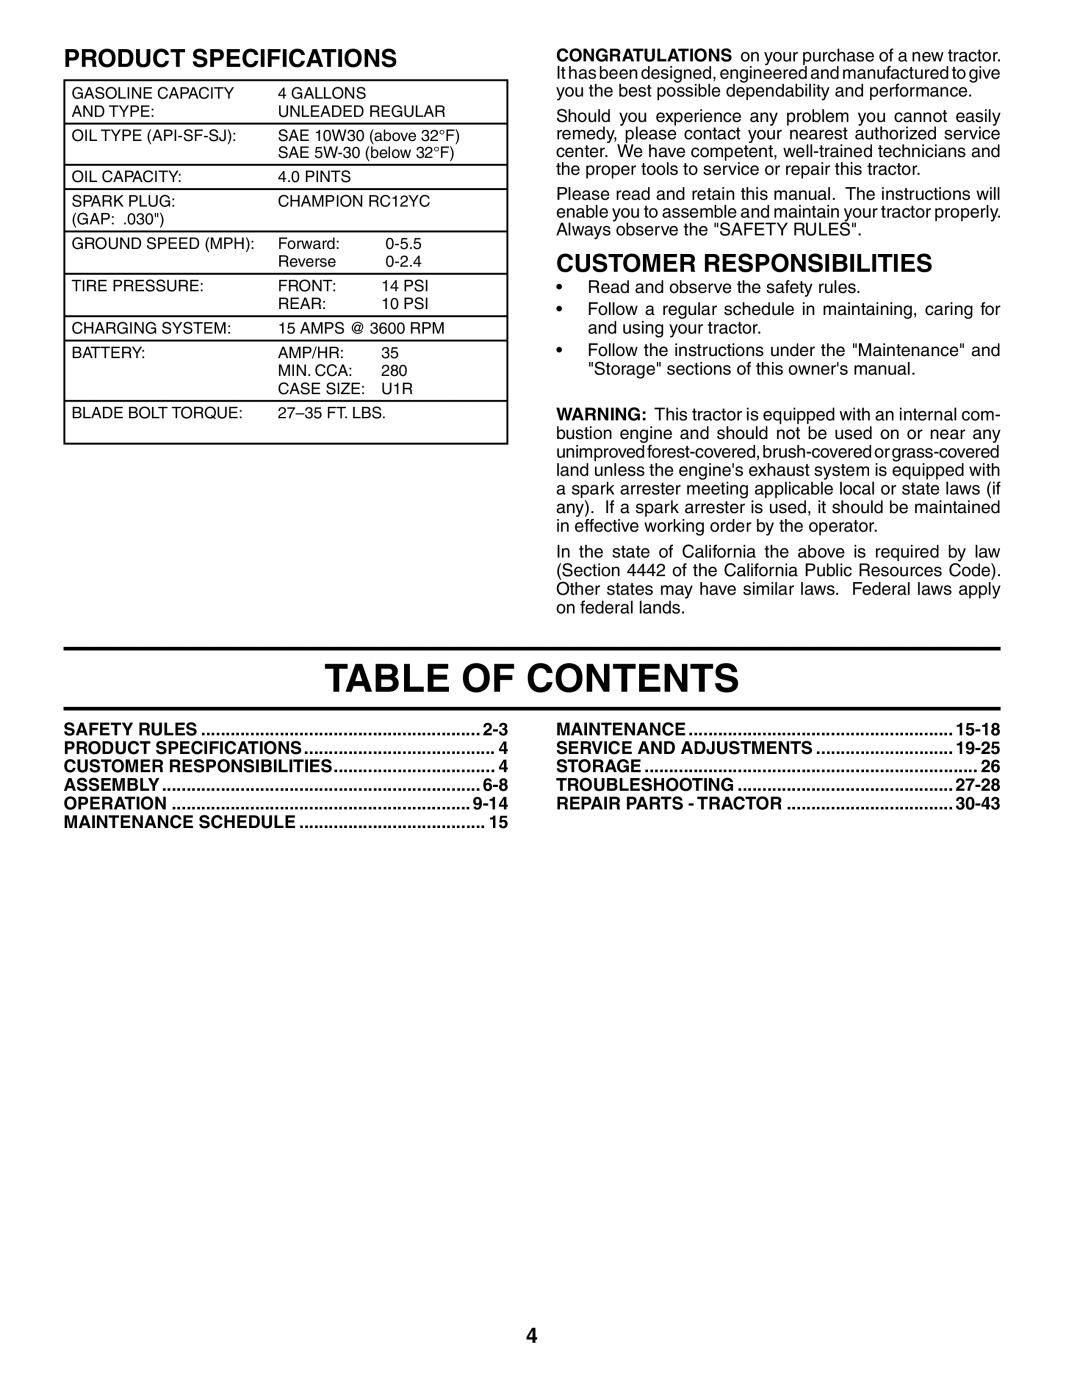 Husqvarna YTH2242 owner manual Table Of Contents, Product Specifications, Customer Responsibilities 